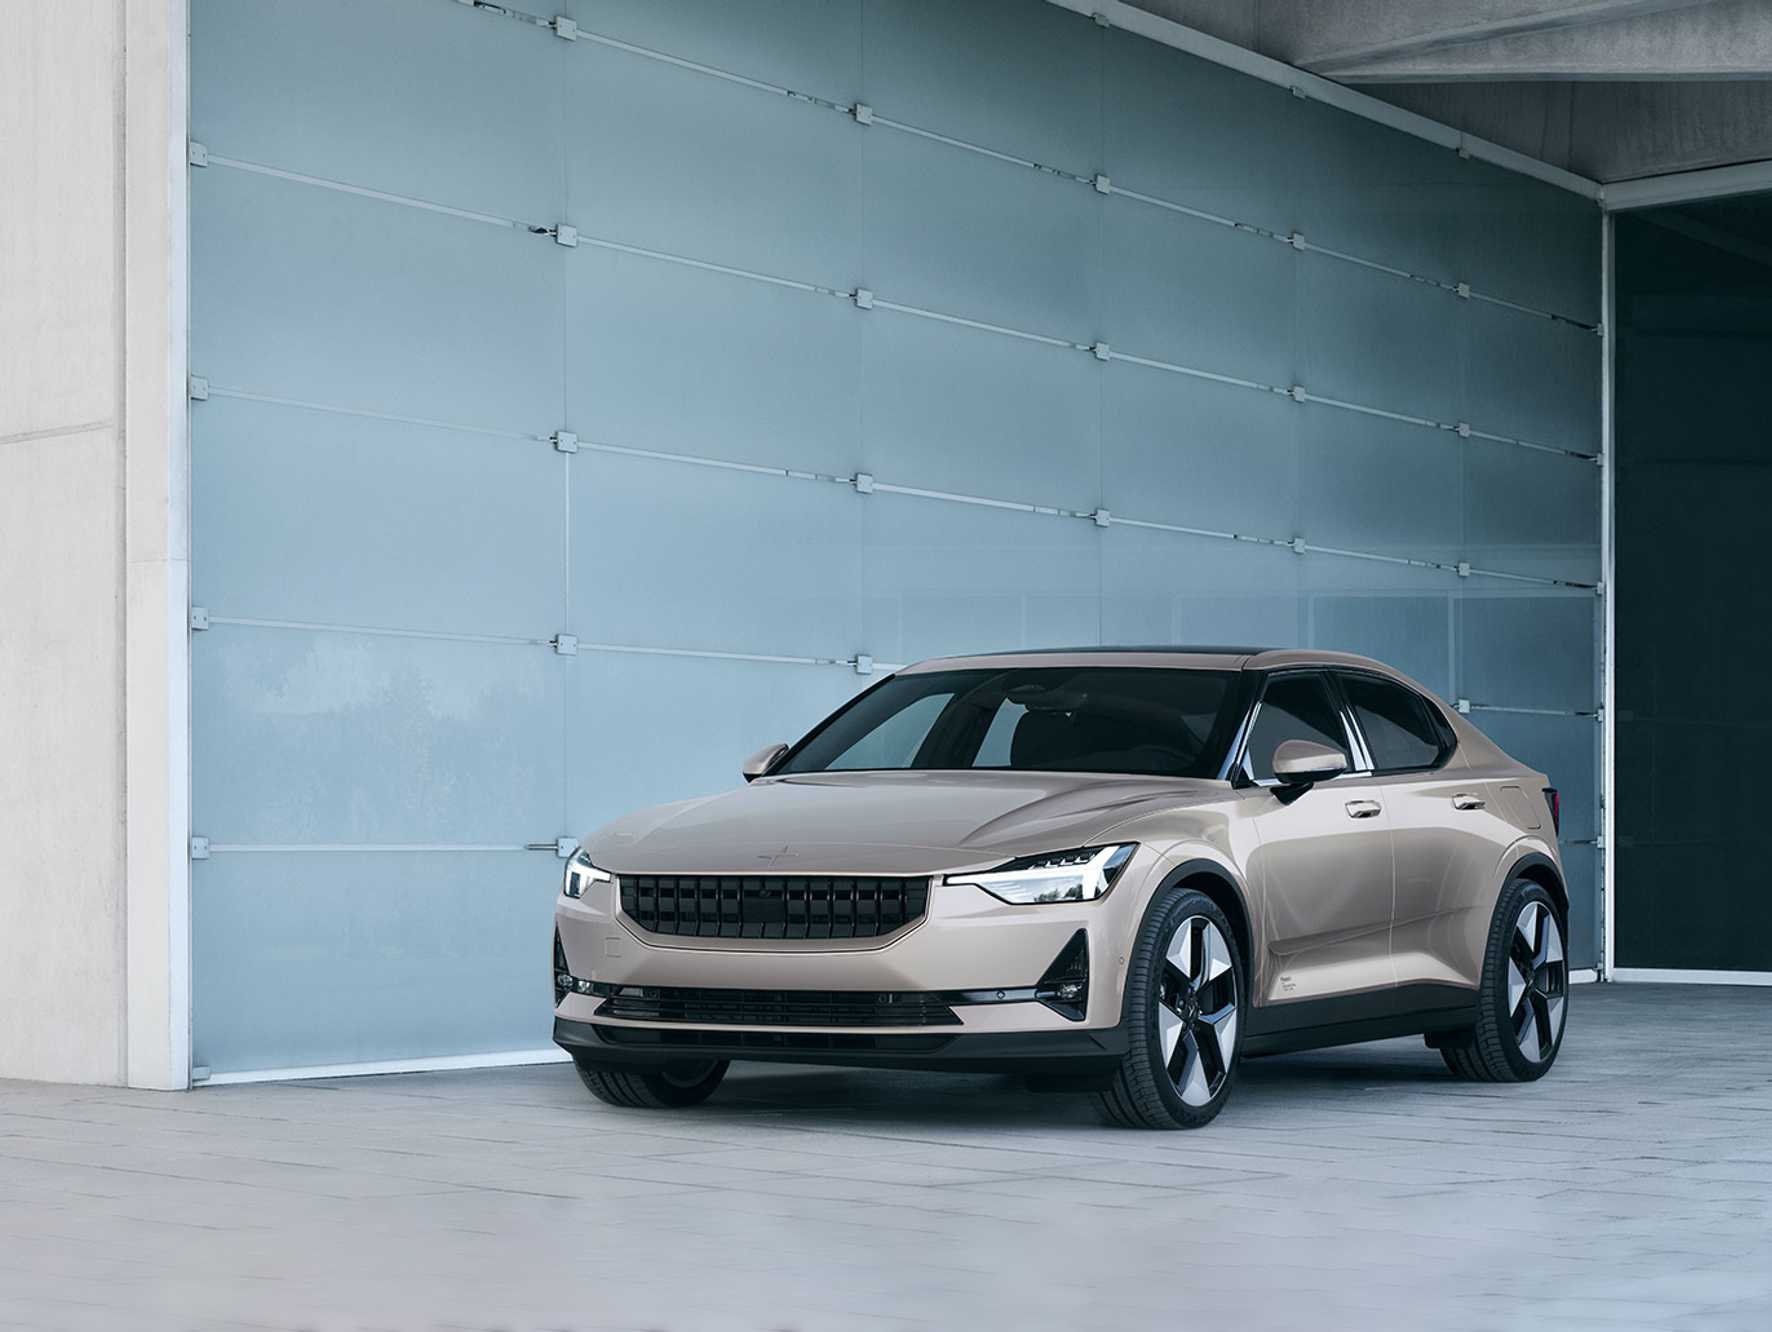 Meet Polestar 2, a Volvo in an Electric Suit